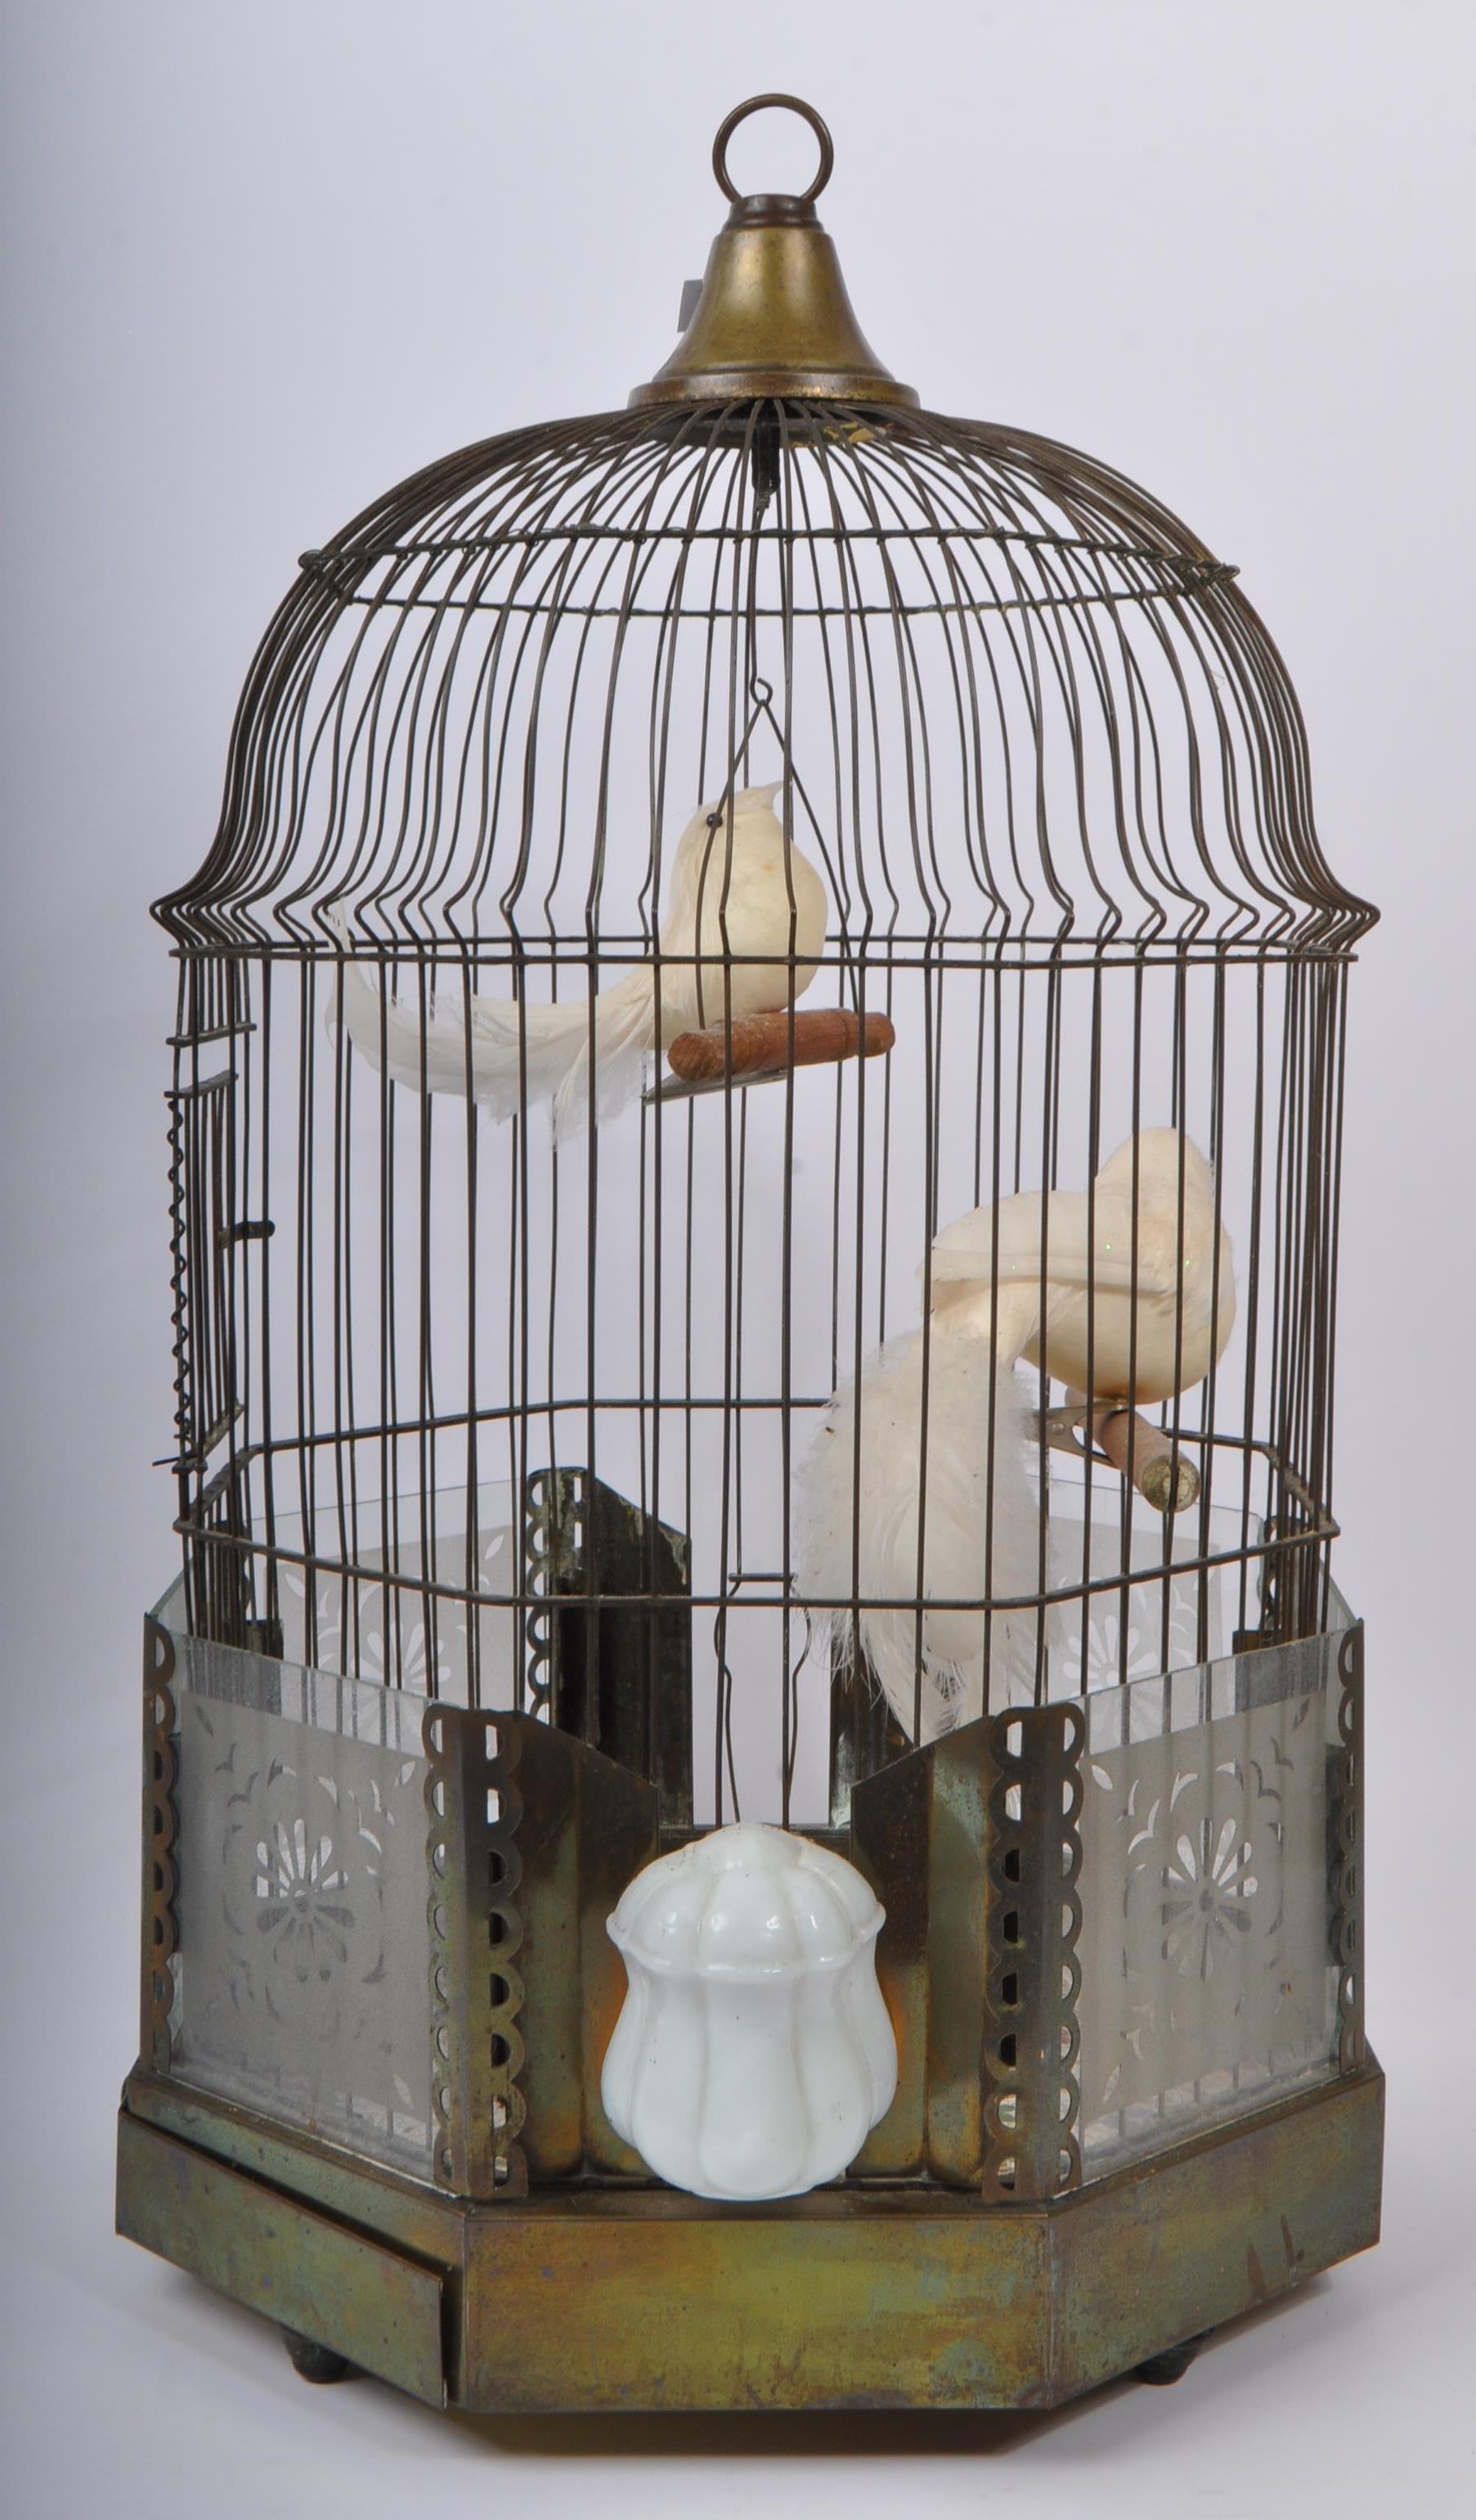 EARLY 20TH CENTURY BRASS BIRD CAGE - Image 4 of 6